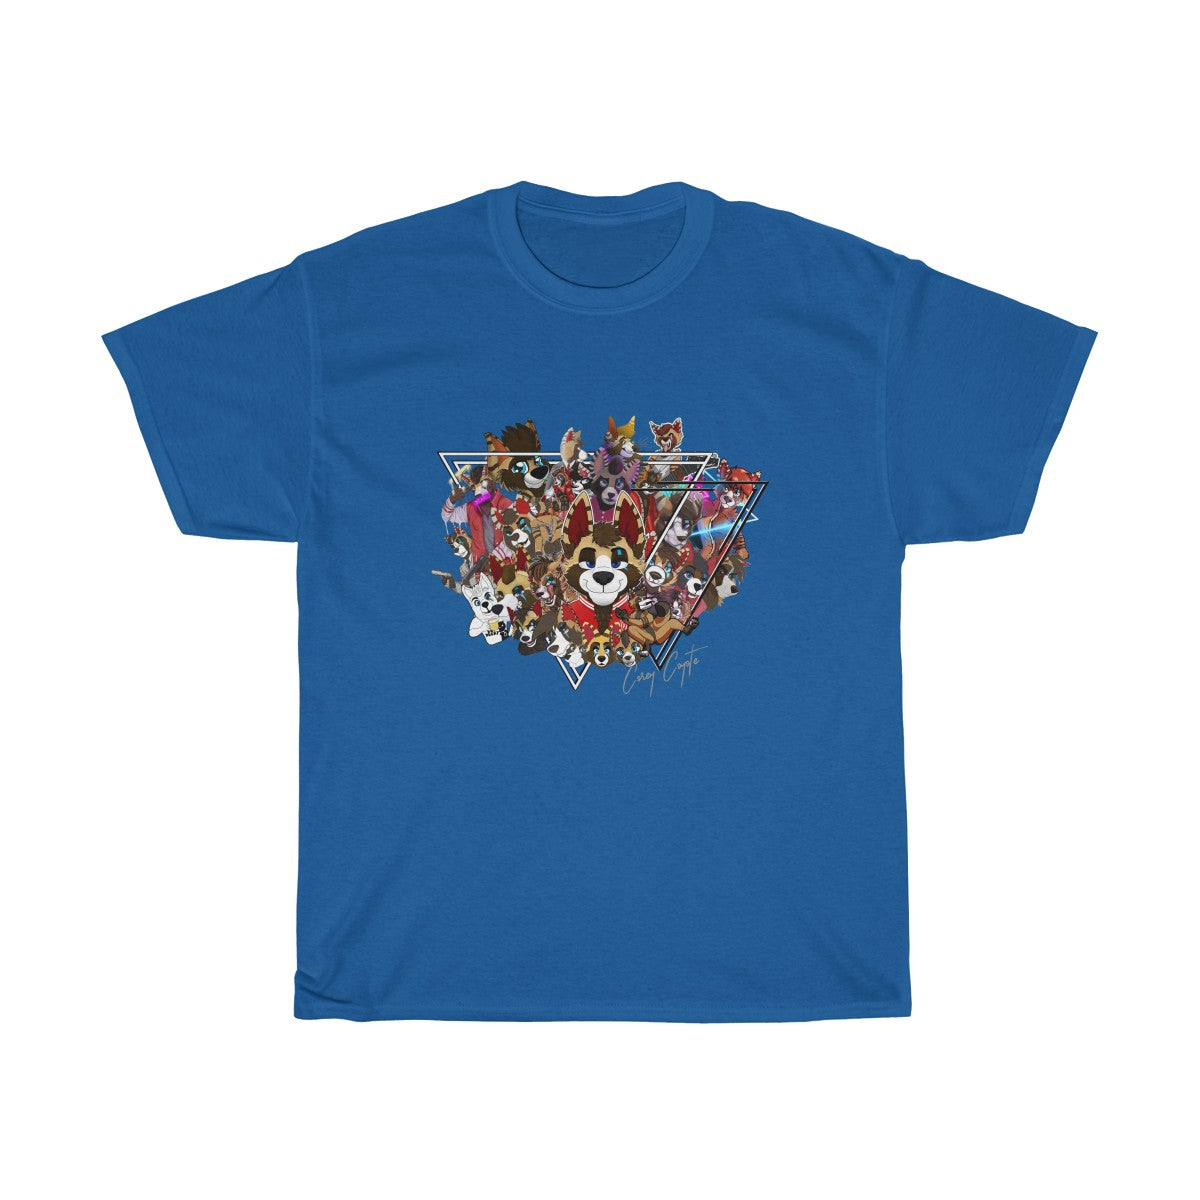 For The Fans - T-Shirt T-Shirt Corey Coyote Royal Blue S 